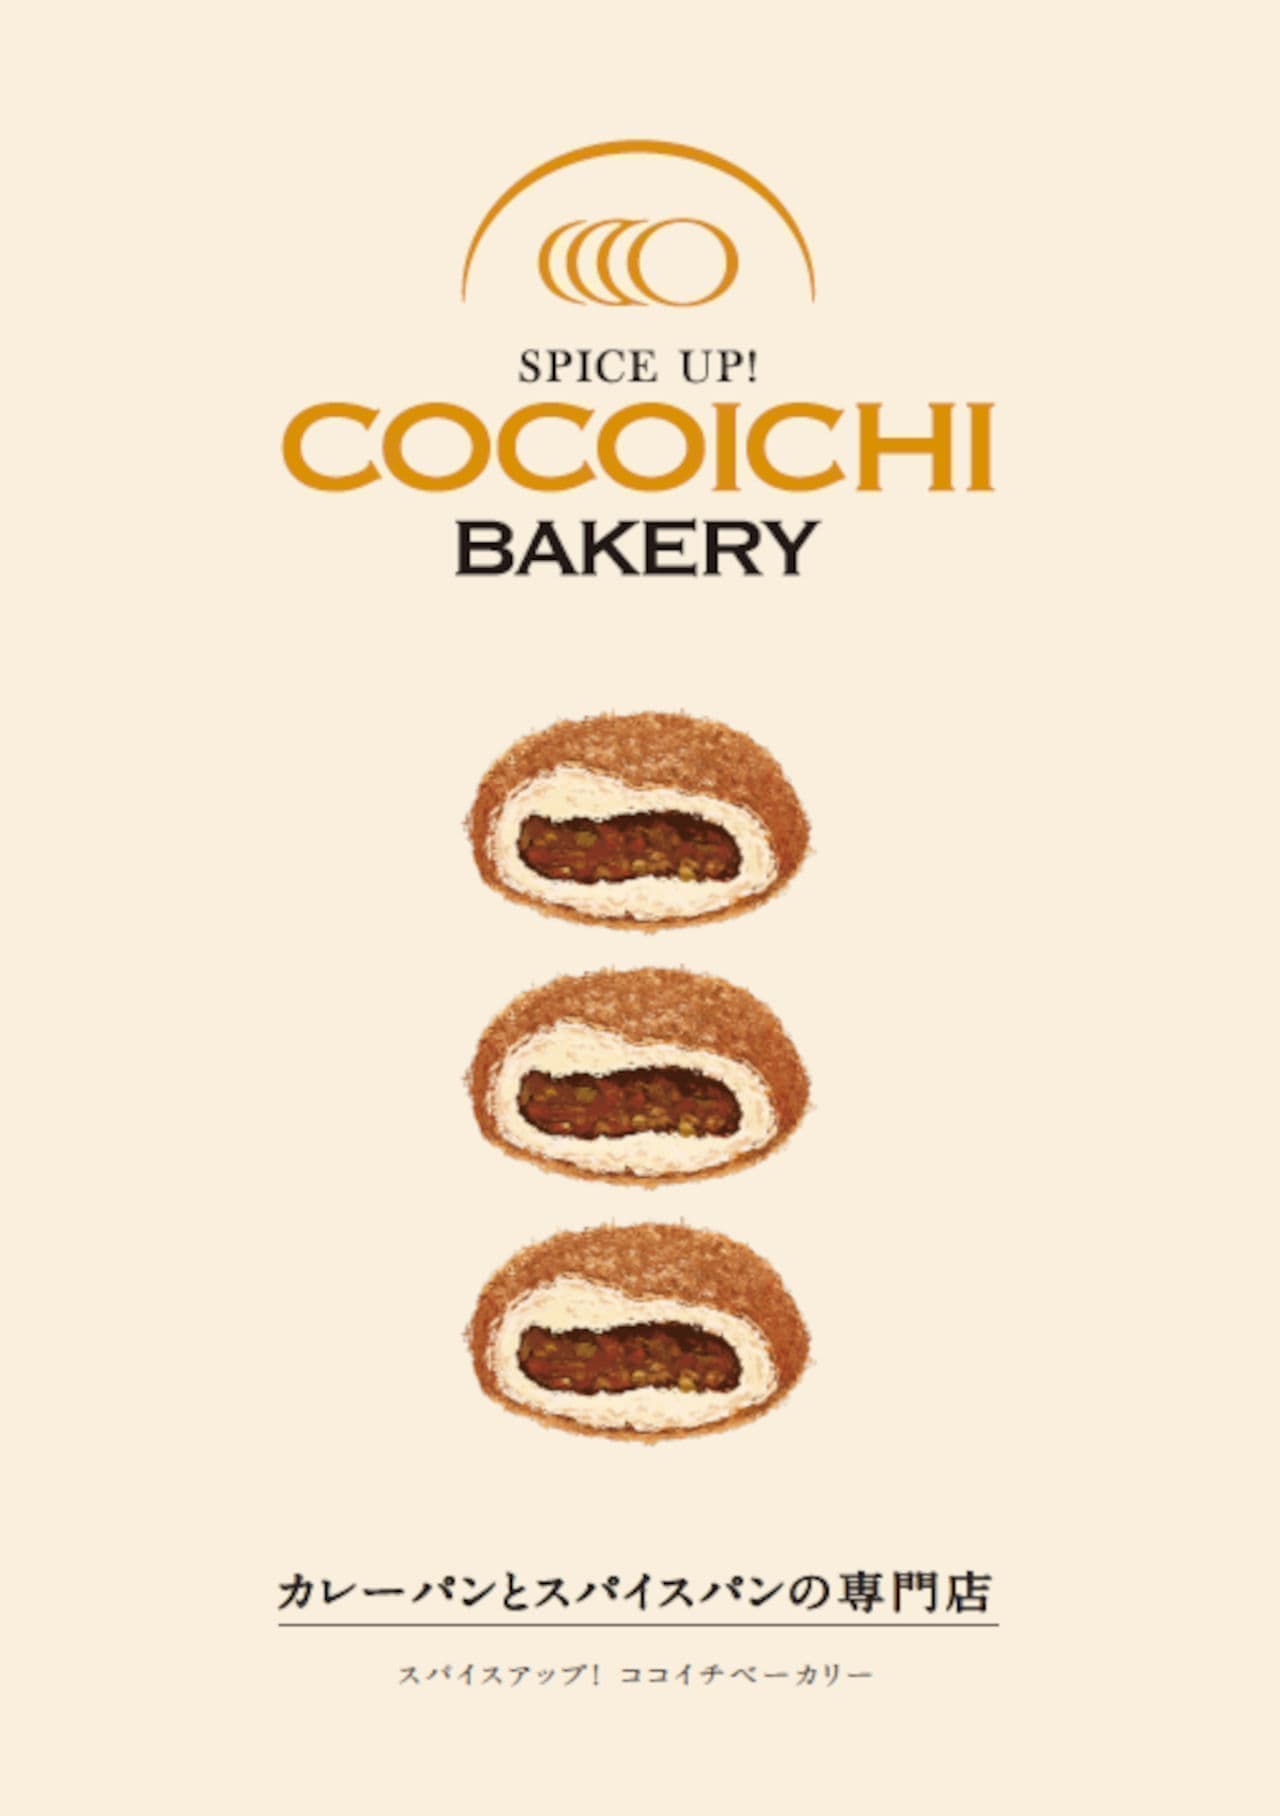 Coco Ich "Spice Up! Coco Ich Bakery".